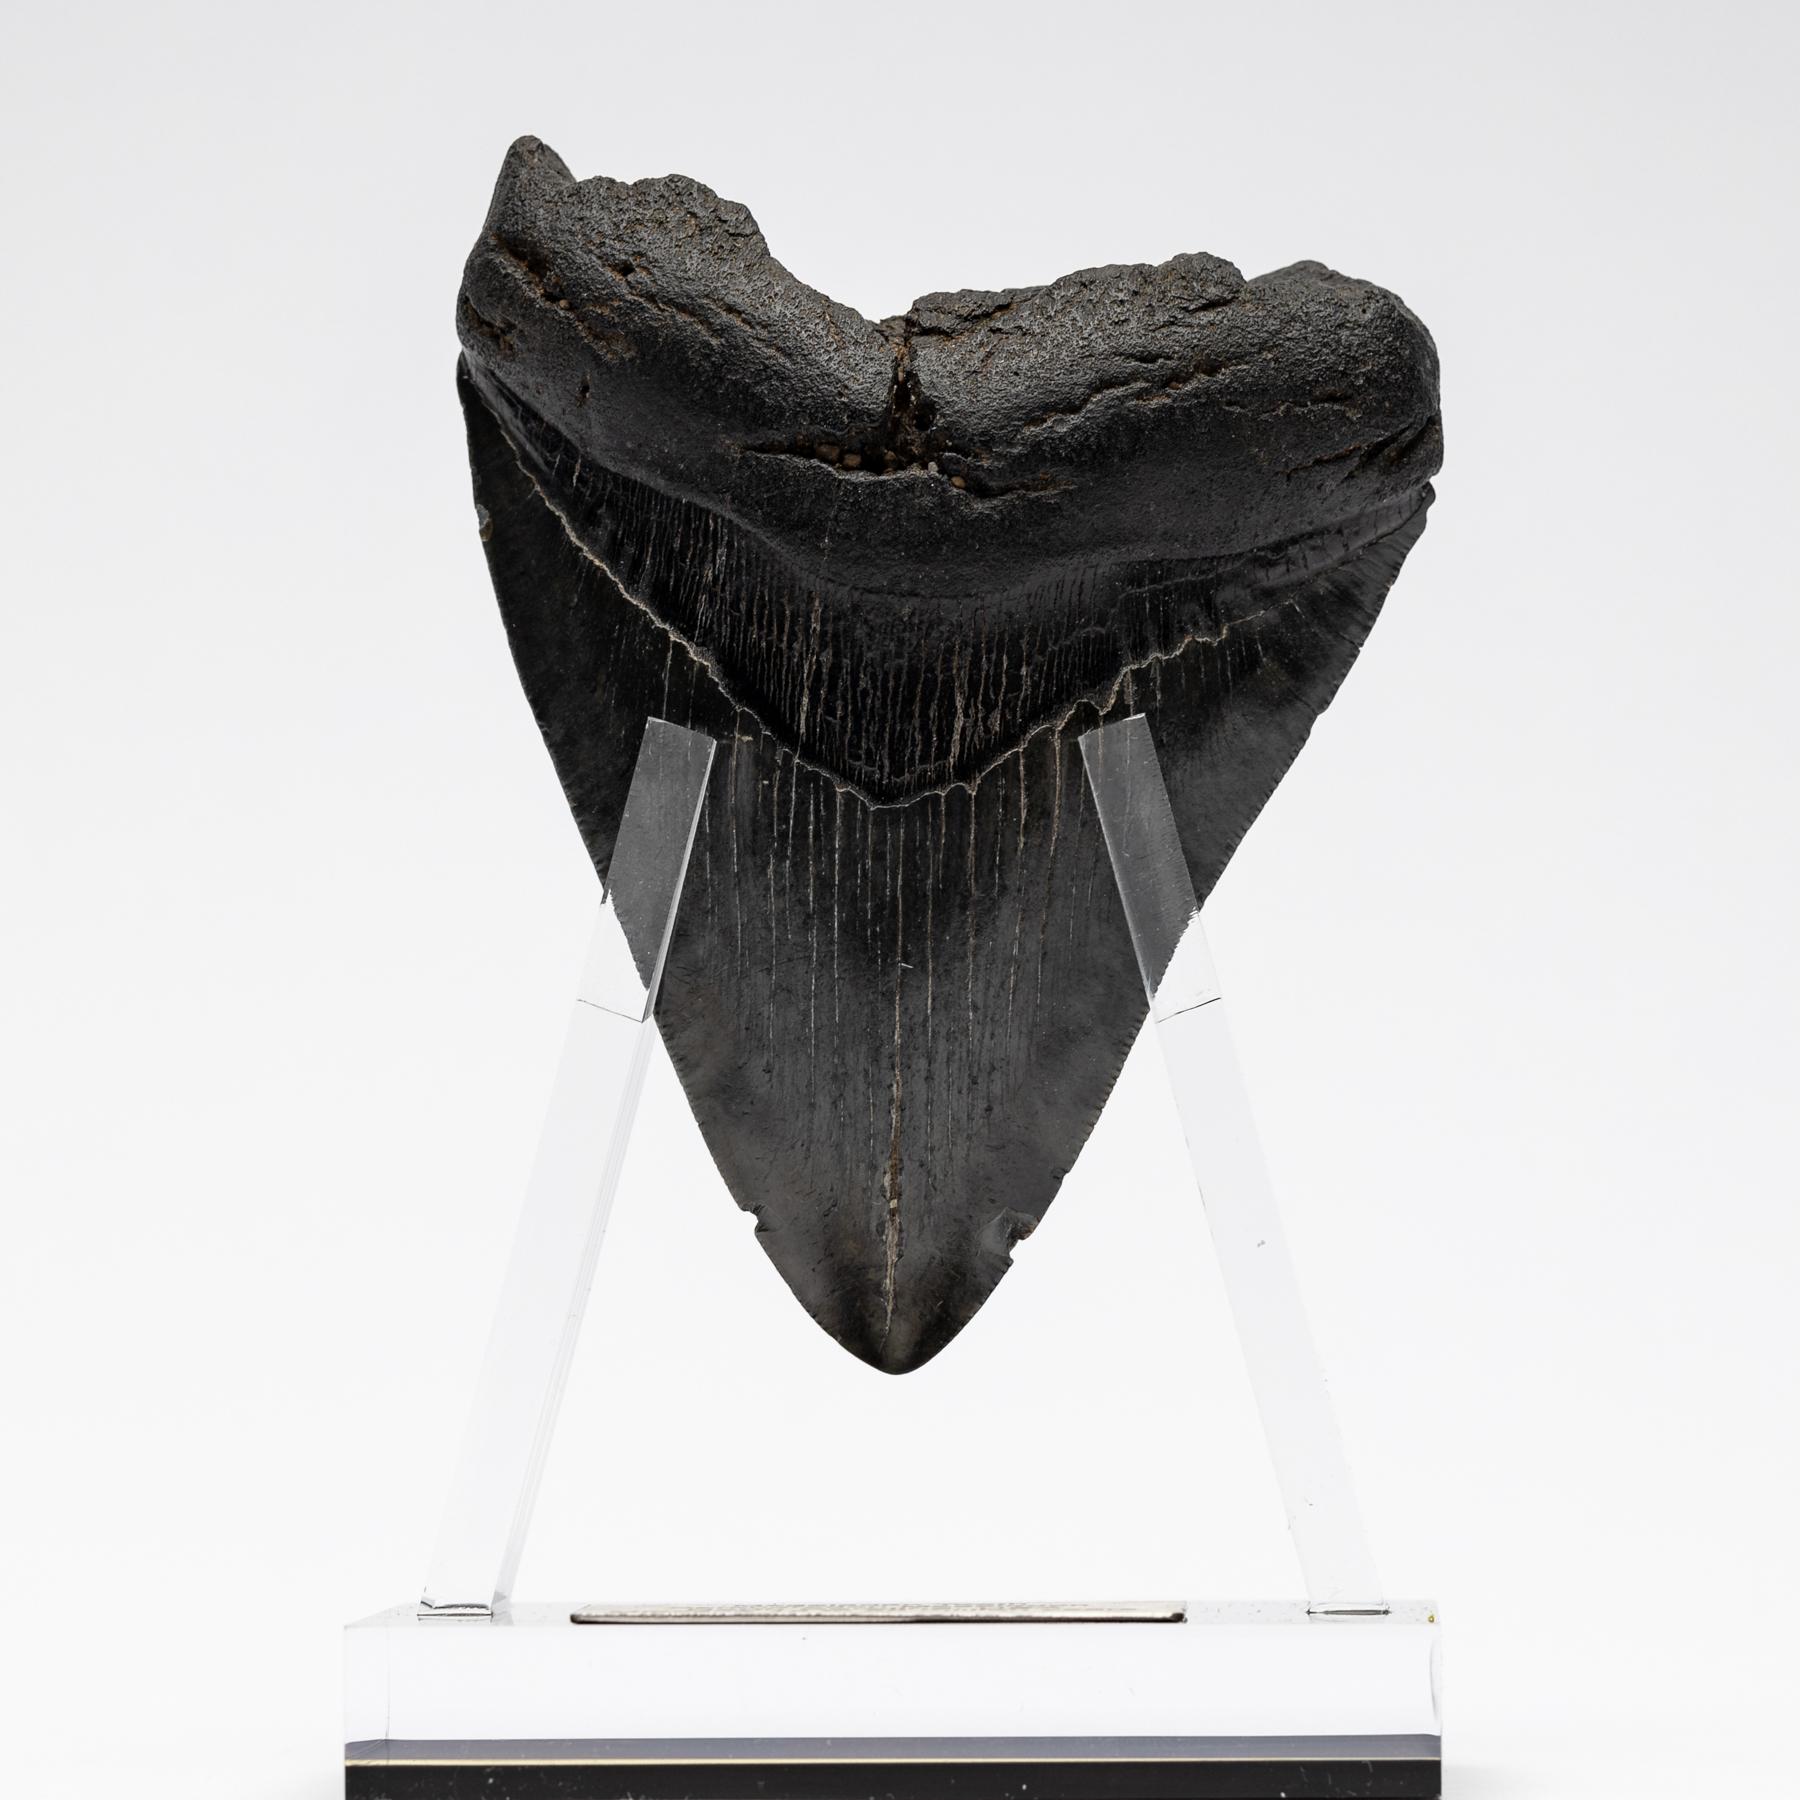 Mexican Fossil Megalodon 